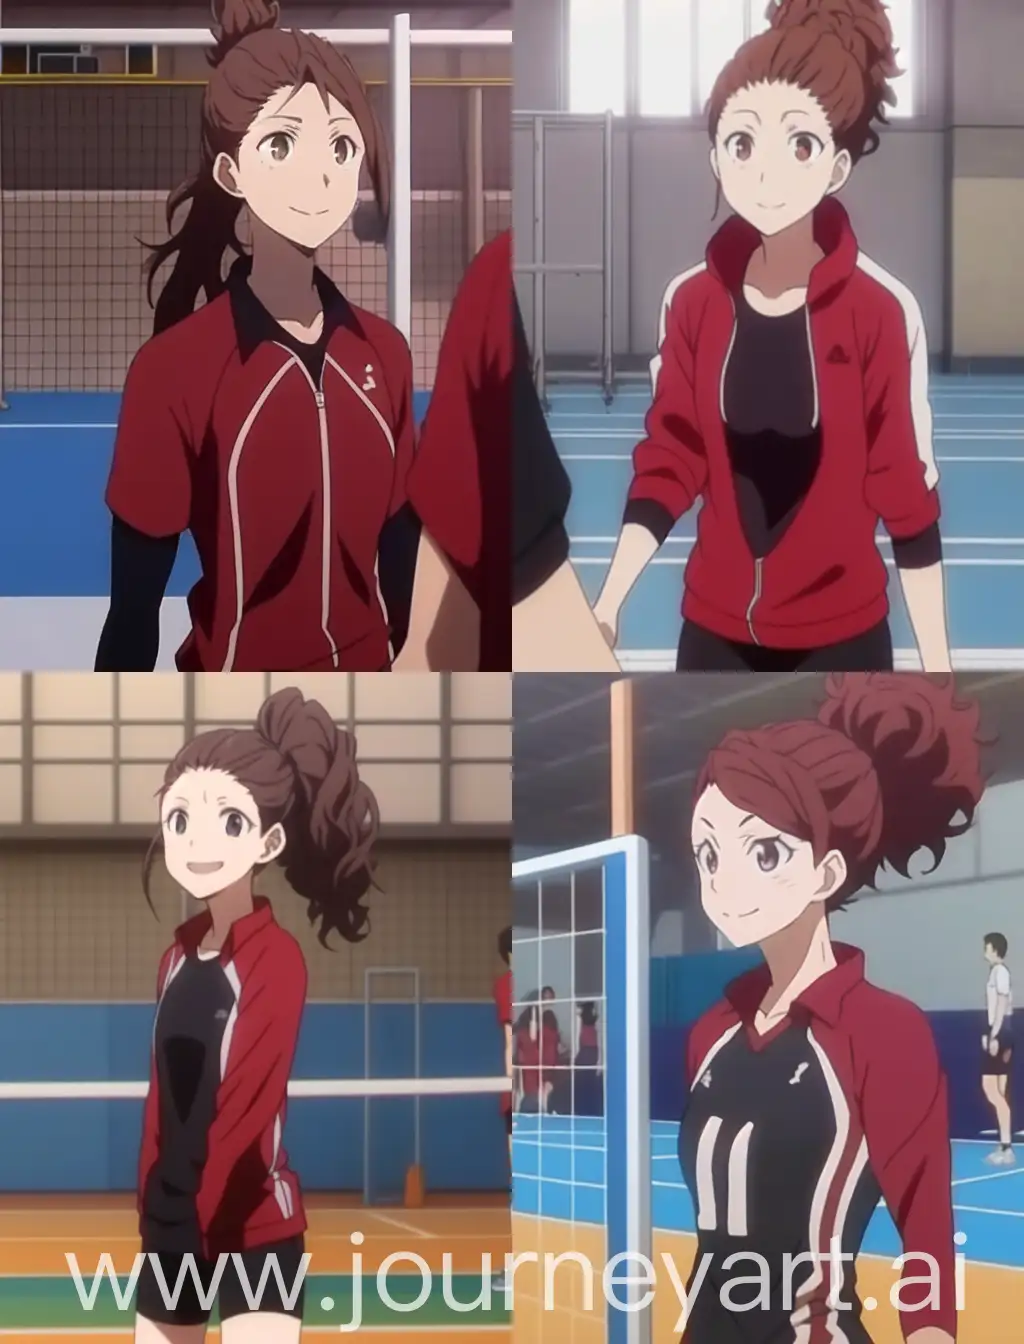 Girl-Walking-in-Sports-Gym-Morning-Routine-with-Auburn-Long-Hair-and-Red-Zip-Up-Hoodie